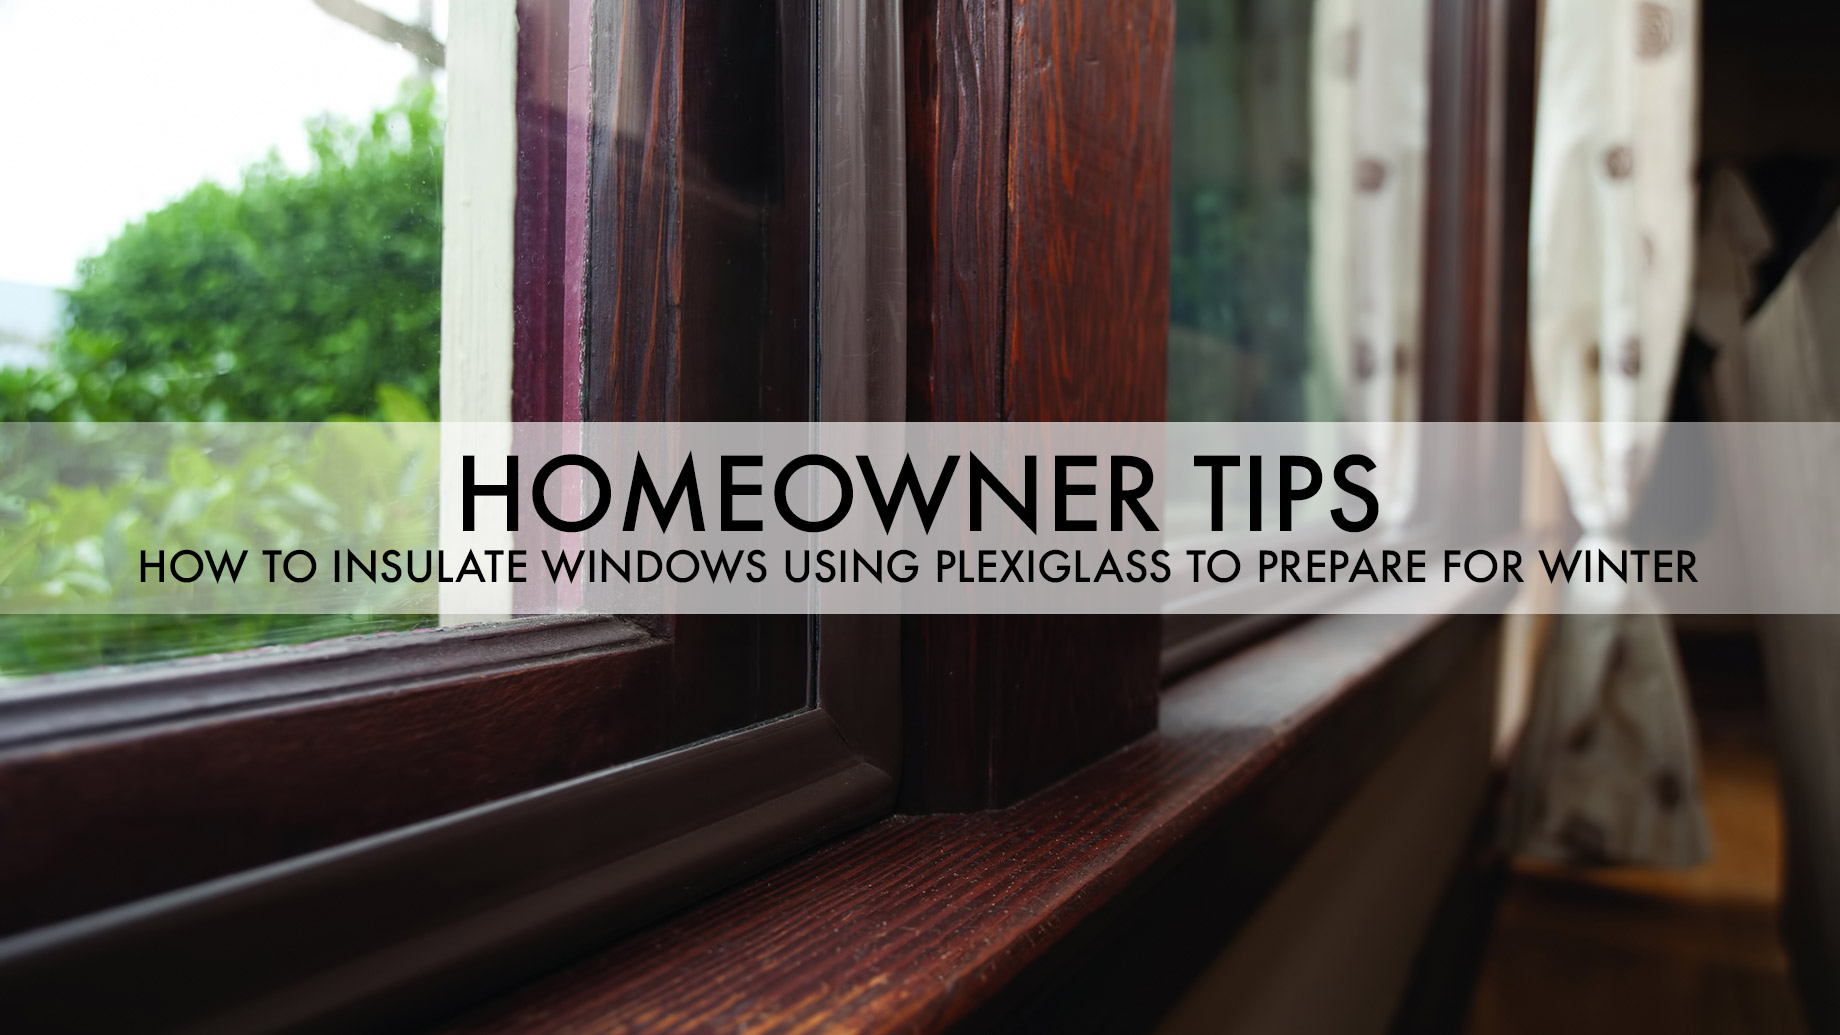 Homeowner Tips - How to Insulate Windows Using Plexiglass to Prepare for Winter